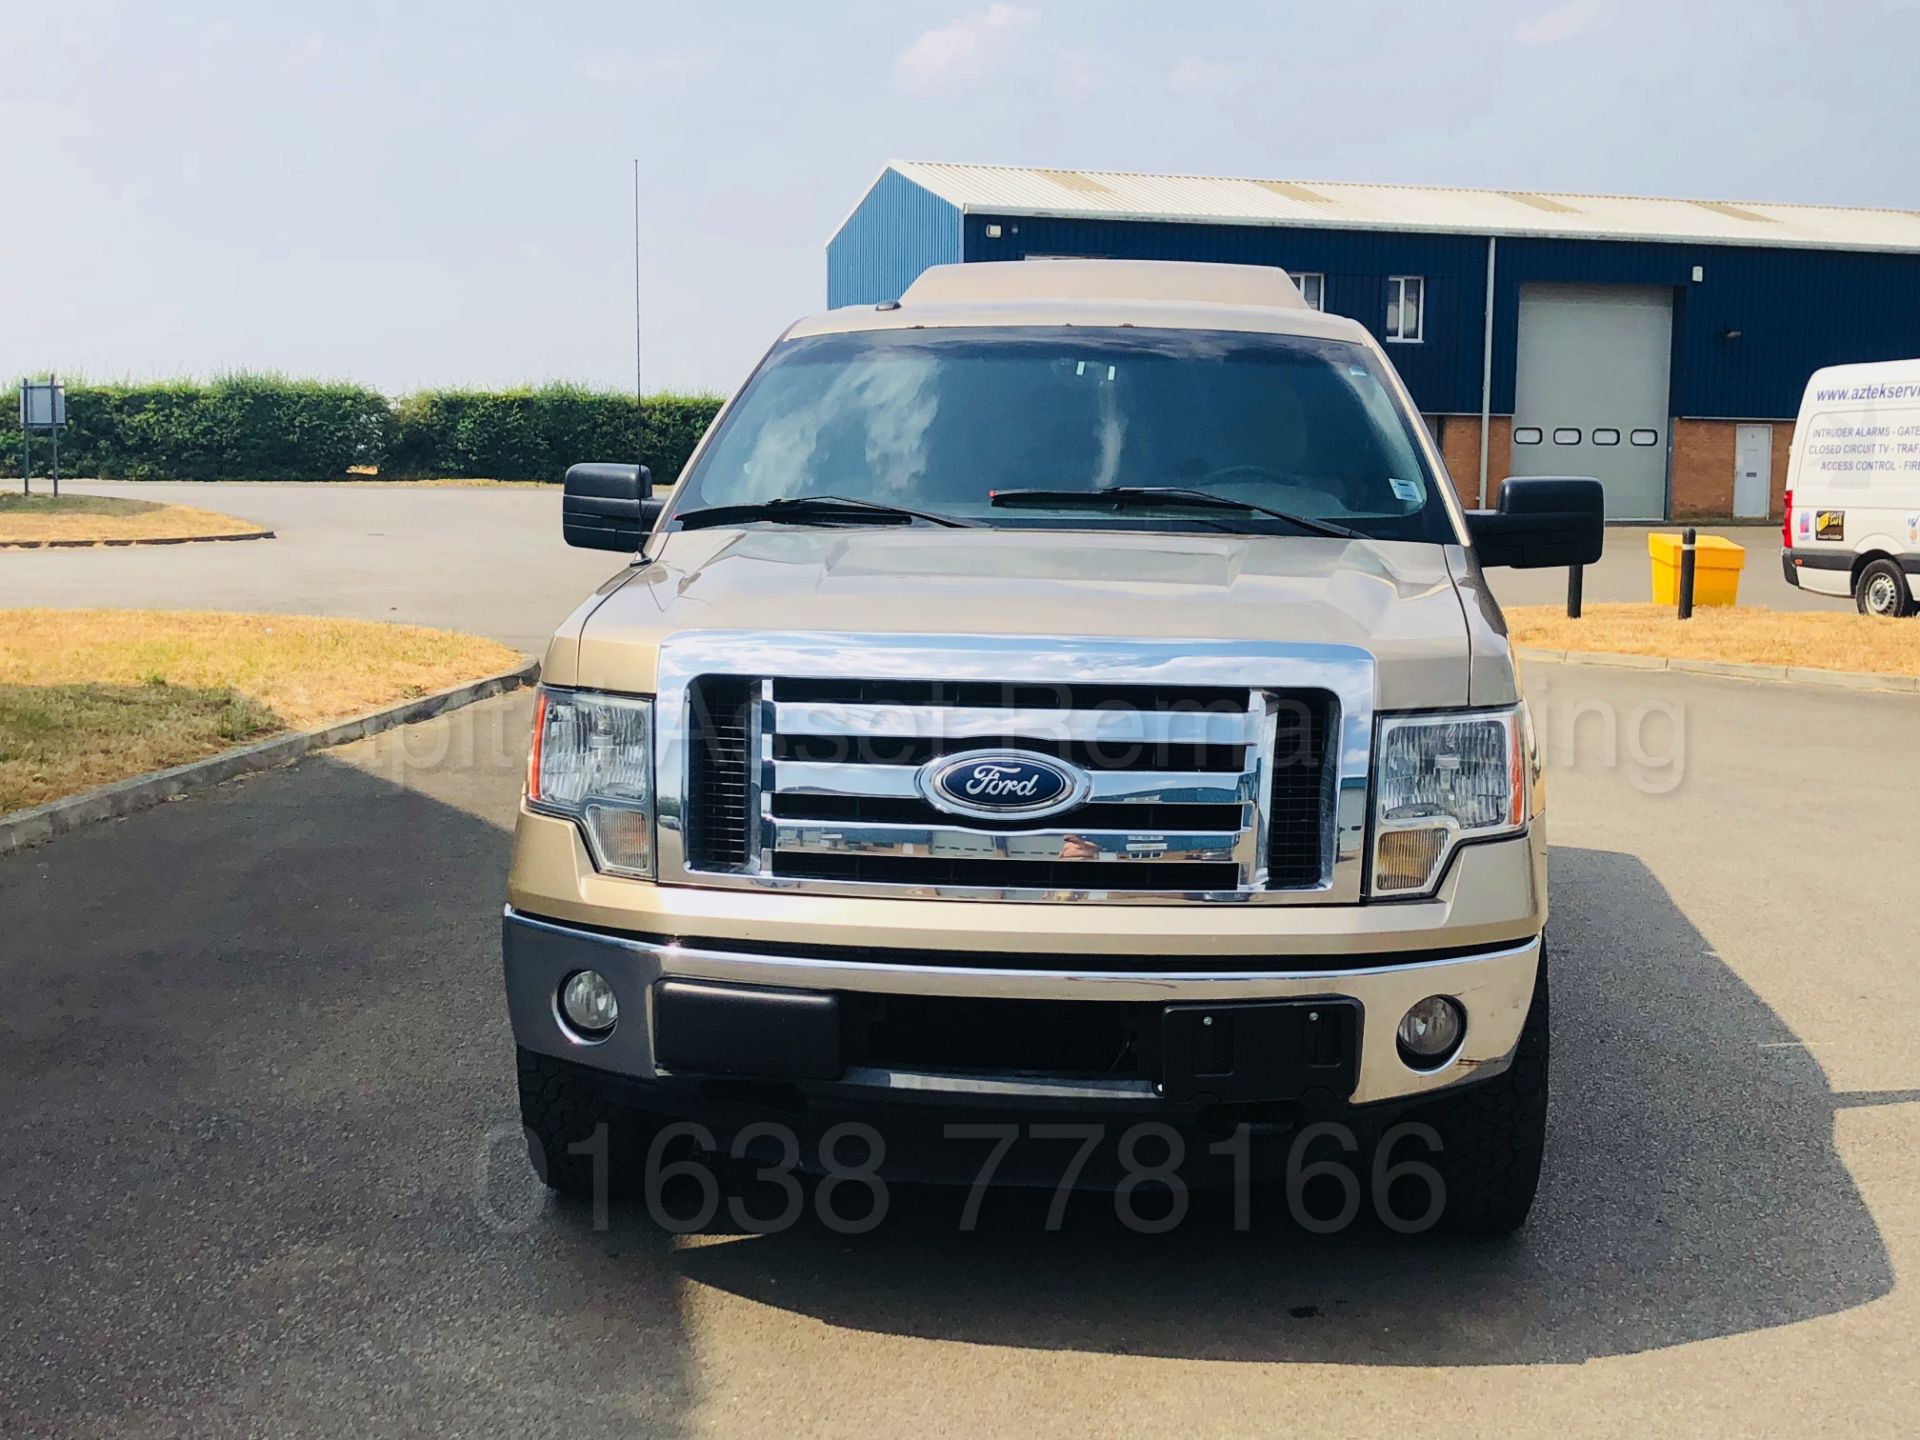 (On Sale) FORD F-150 5.4 V8 XLT EDITION KING-CAB (2012) MODEL**4X4**6 SEATER**AUTOMATIC *TOP SPEC* - Image 4 of 52